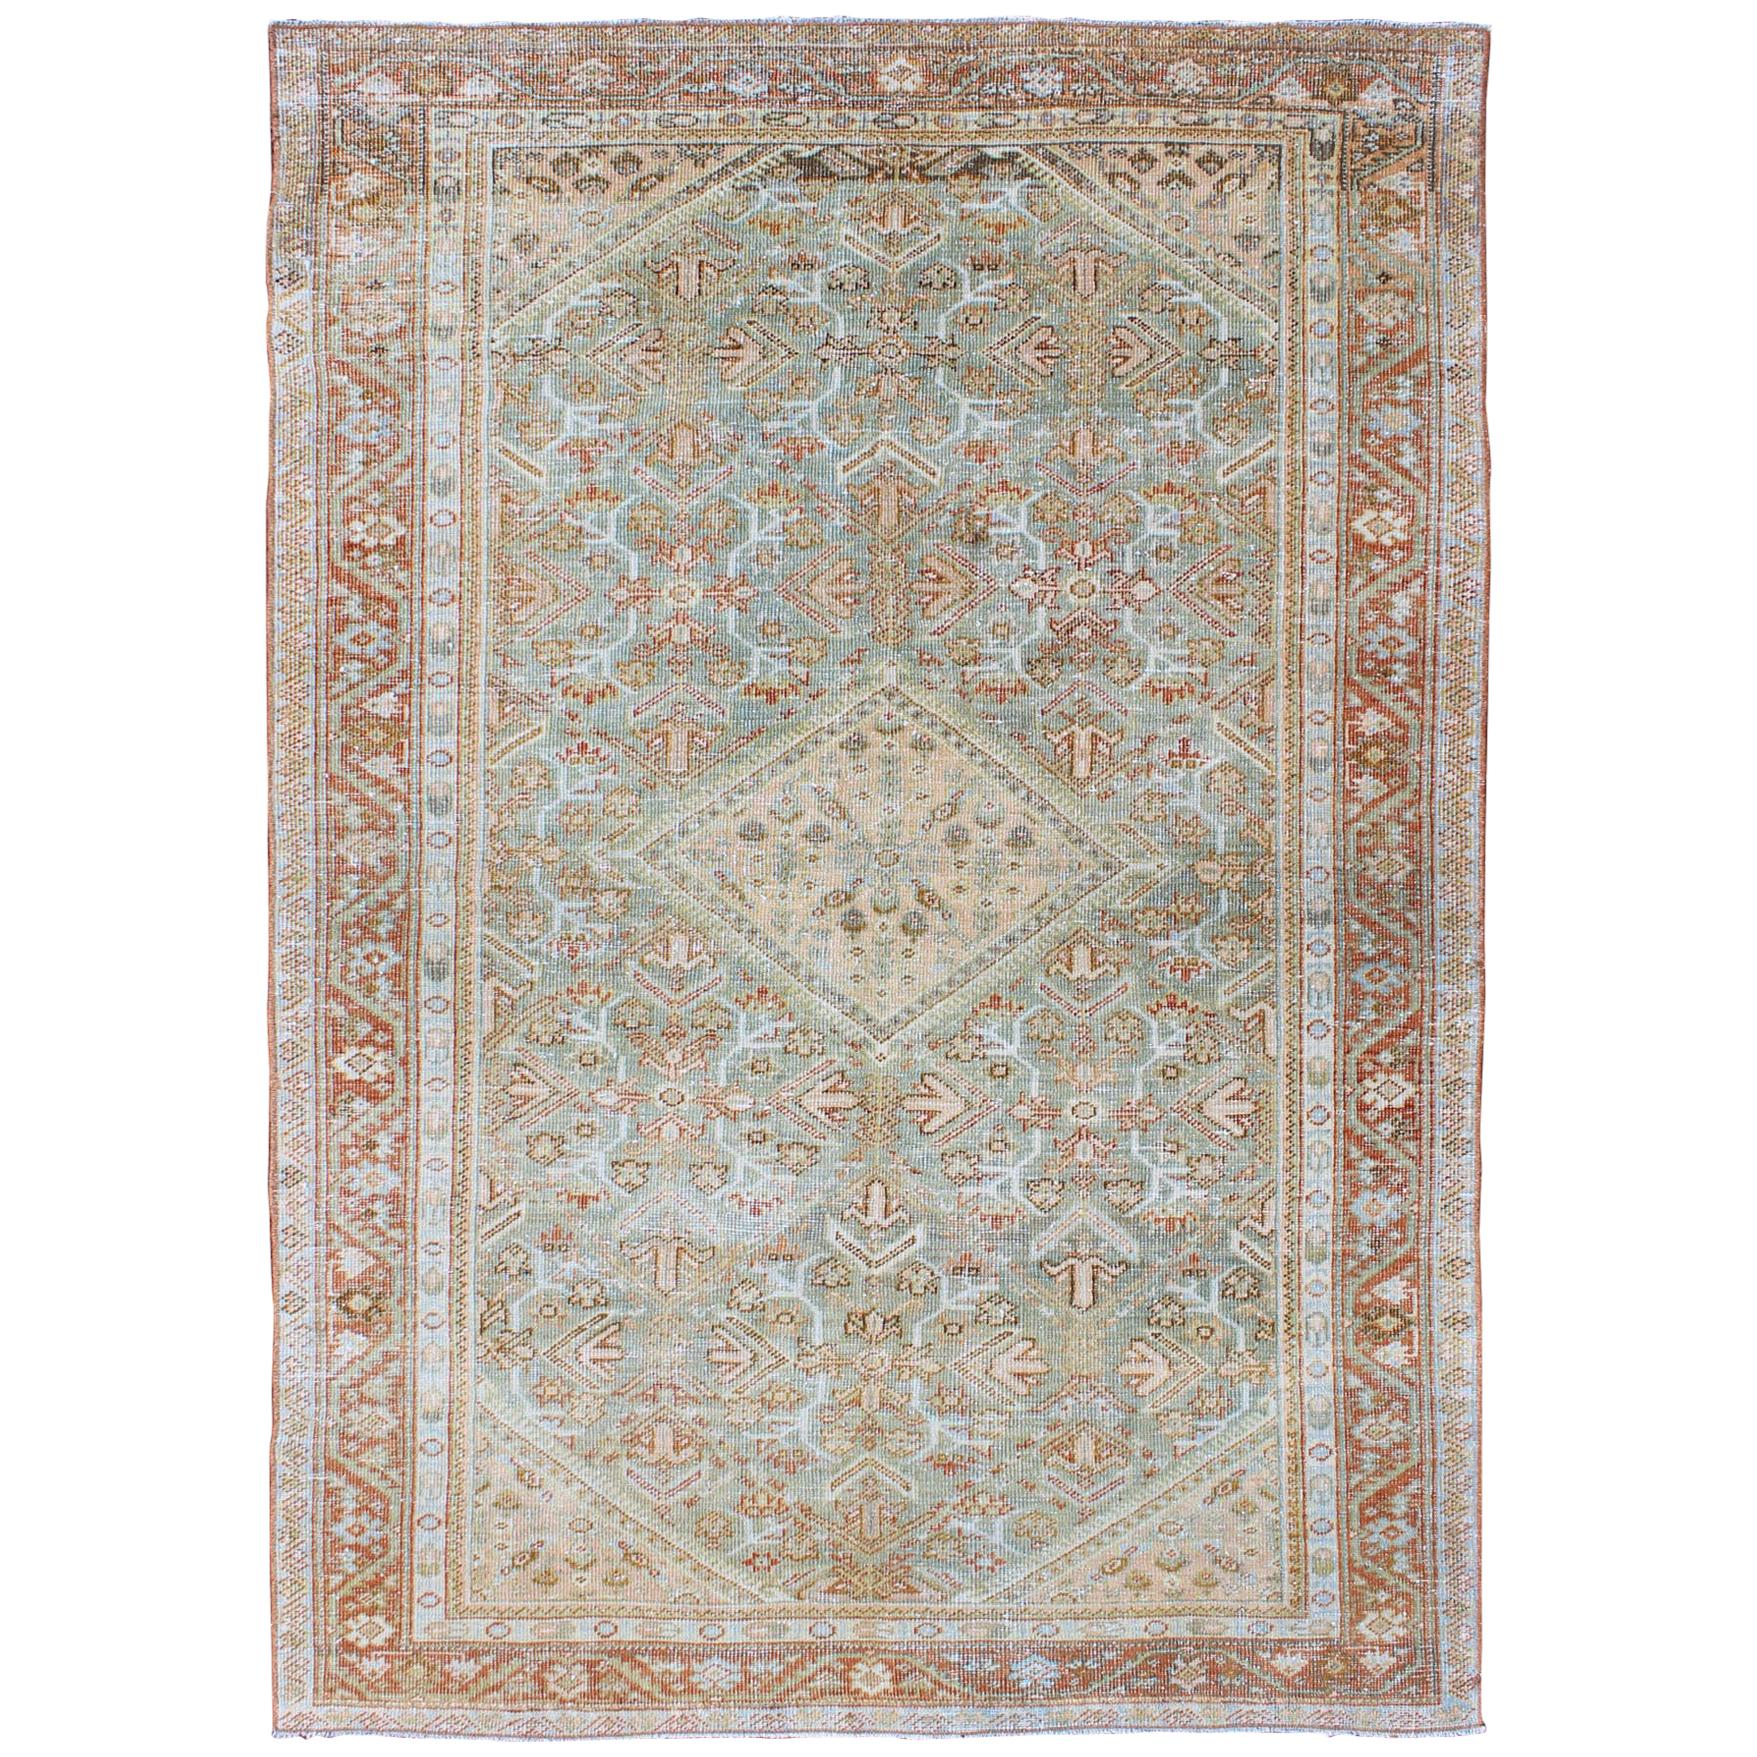 Light Green and Red Antique Persian Mahal Rug with Peach Medallion Design